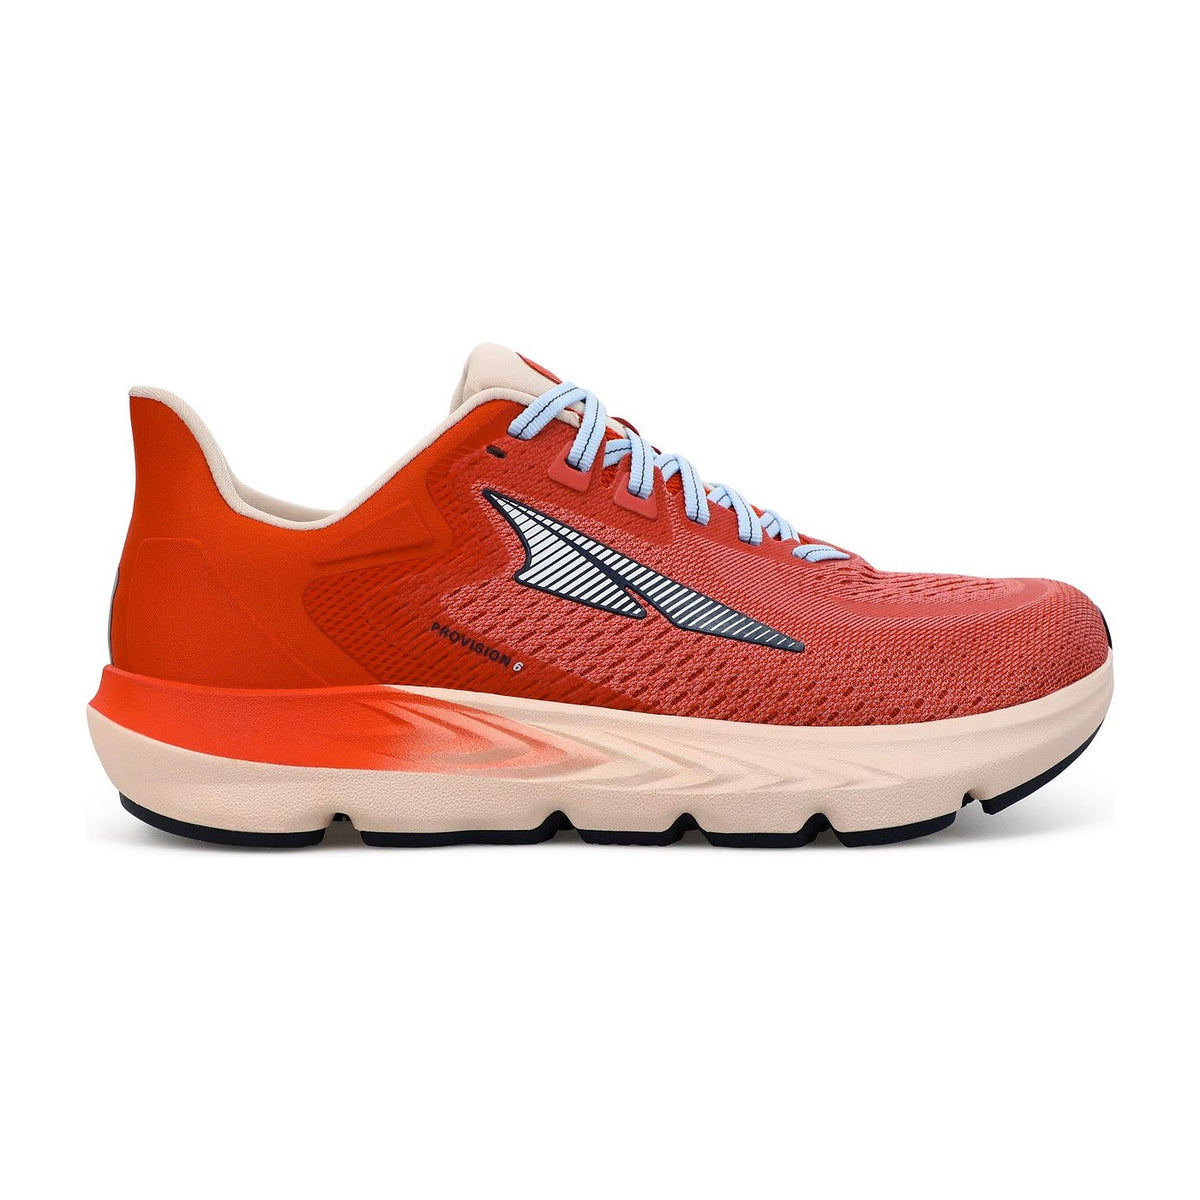 Side view of an orange Altra Provision 6 Raseberry running shoe with distinctive white zigzag stripes and a thick, textured sole.